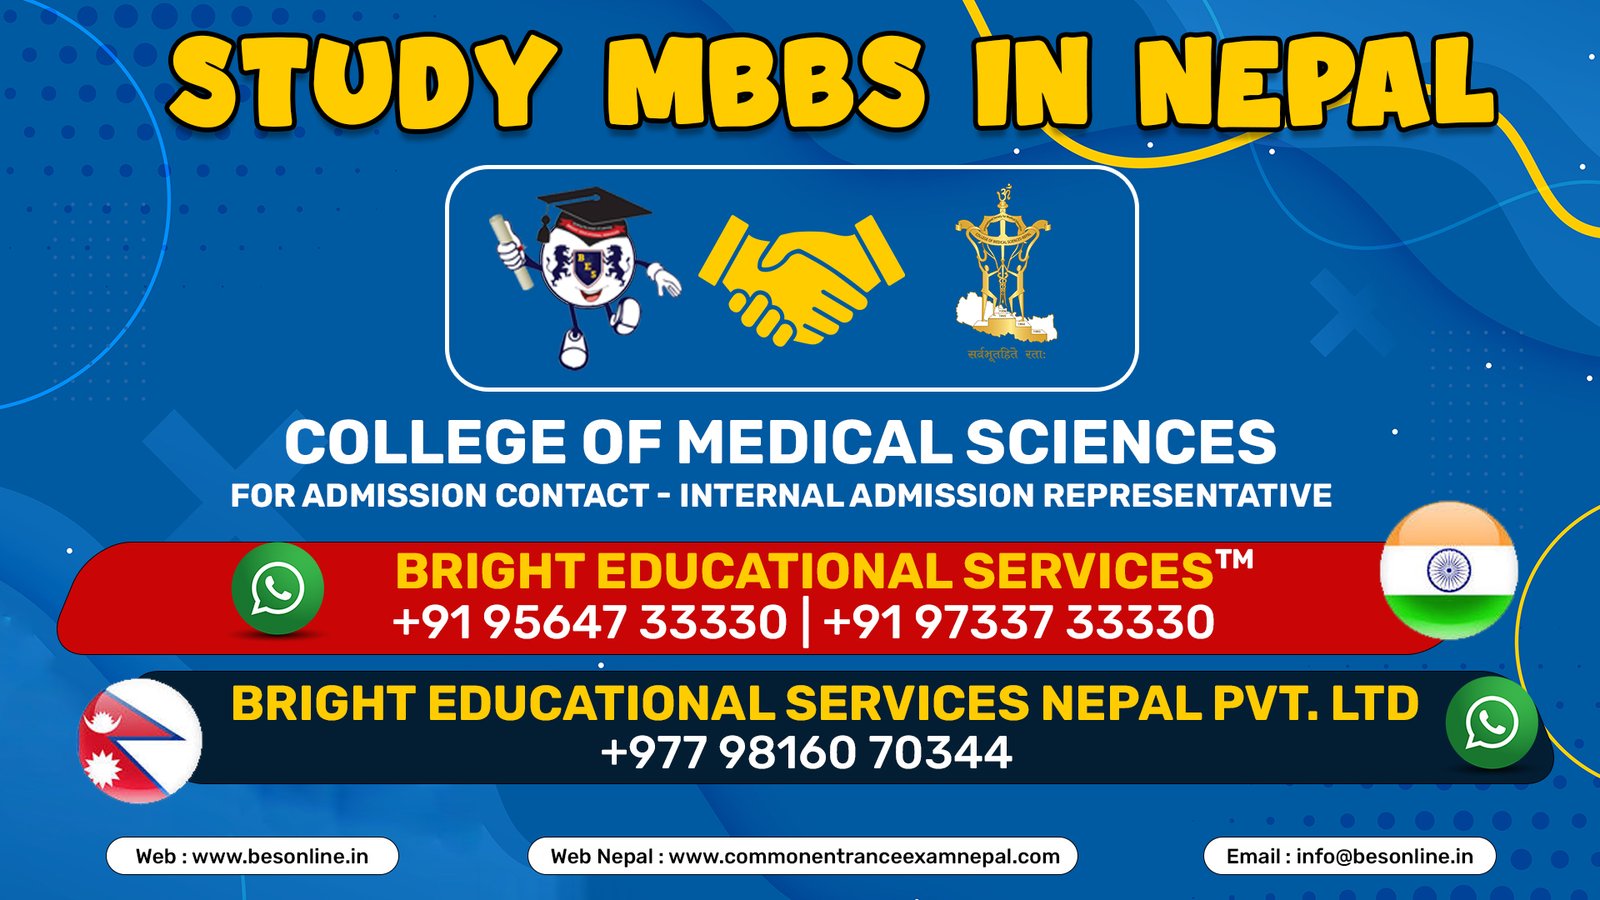 study-mbbs-in-nepal-at-college-of-medical-sciences-in-2023